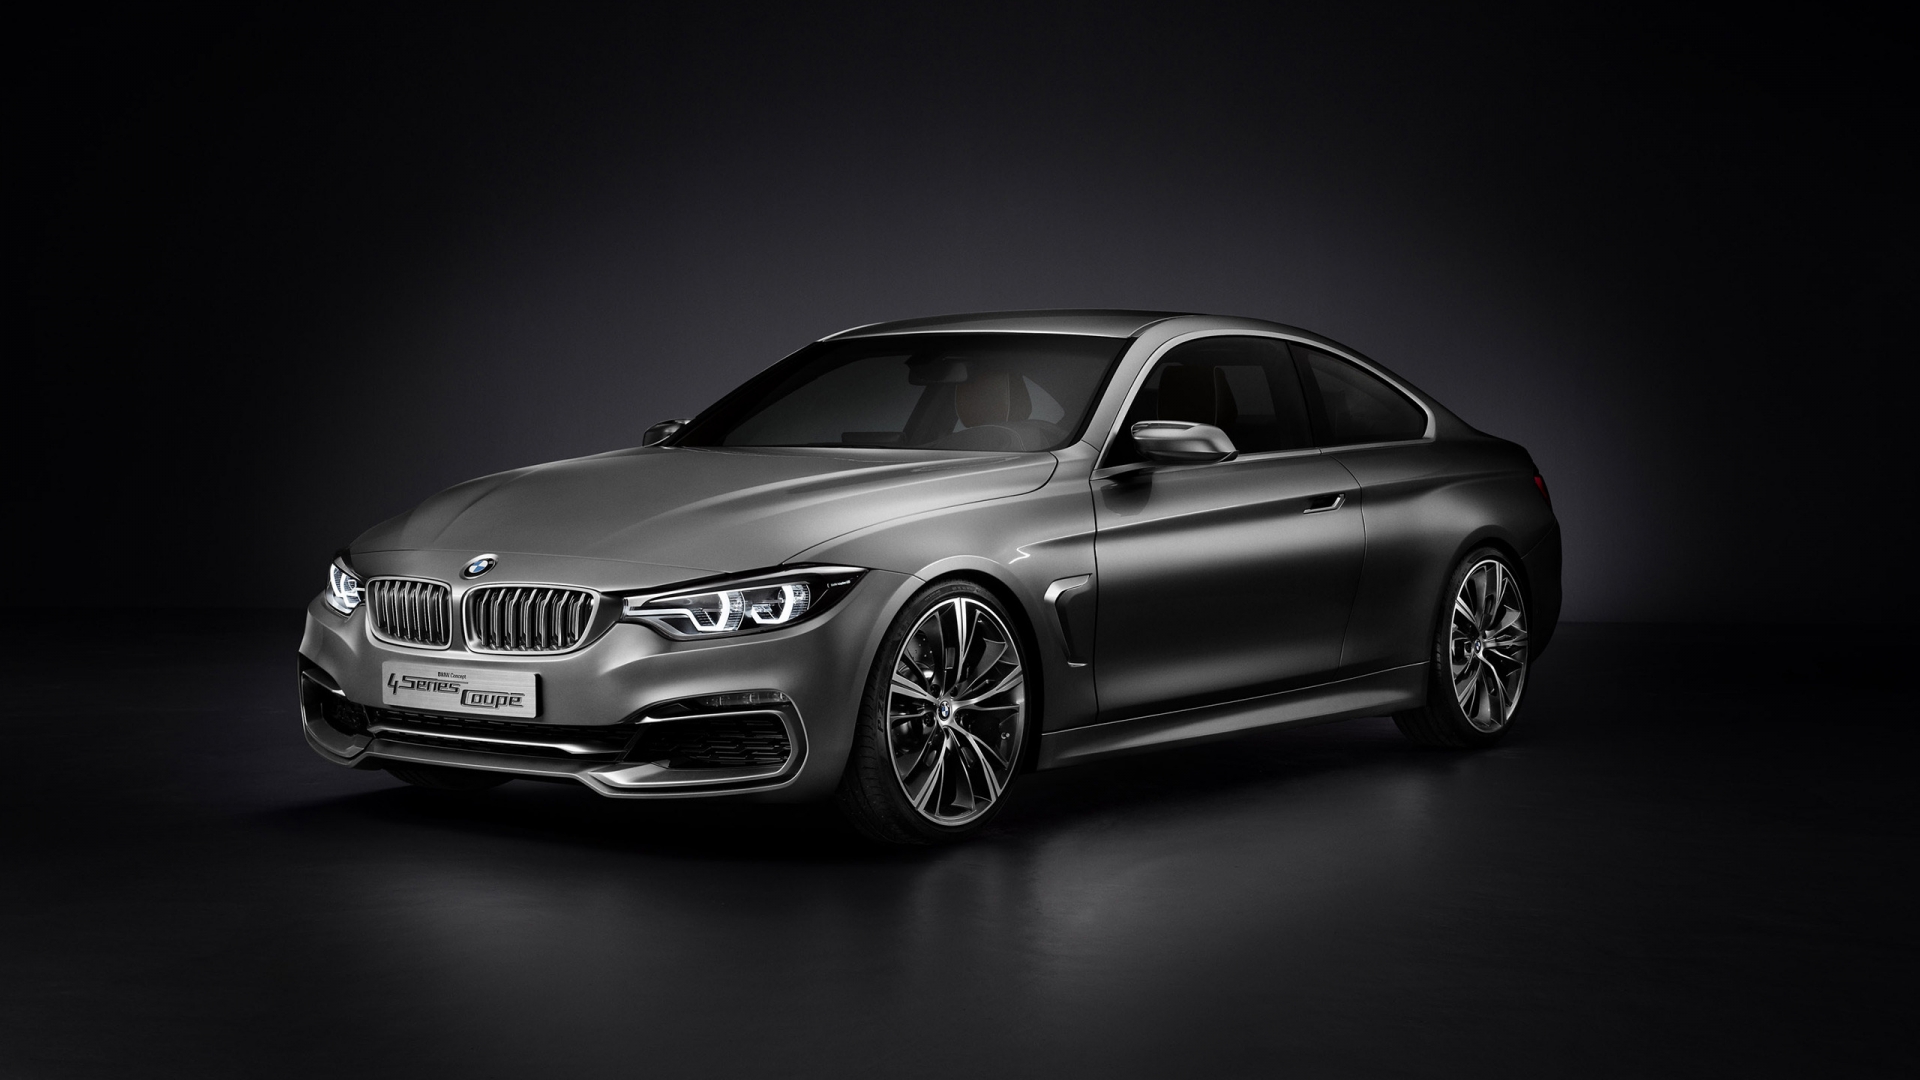 BMW 4 Series Coupe Concept Studio for 1920 x 1080 HDTV 1080p resolution